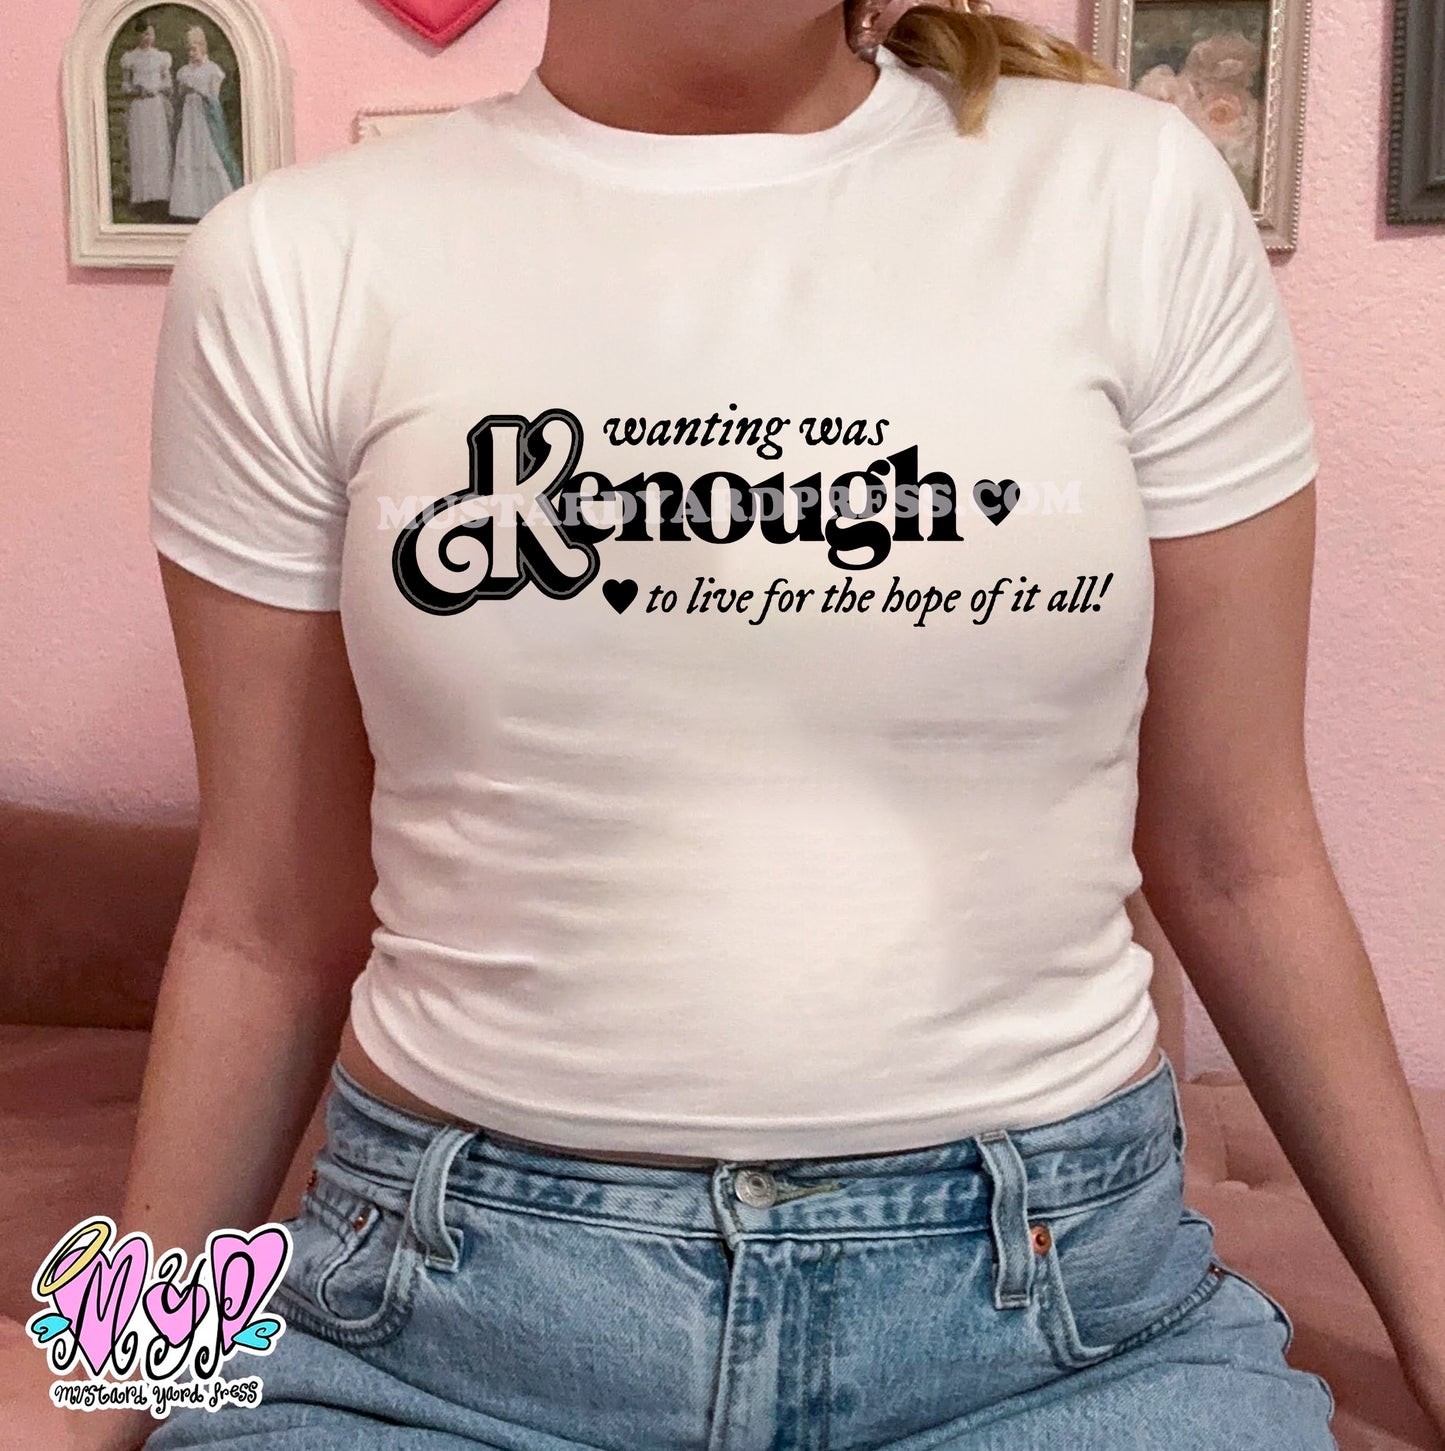 enough august doll baby tee